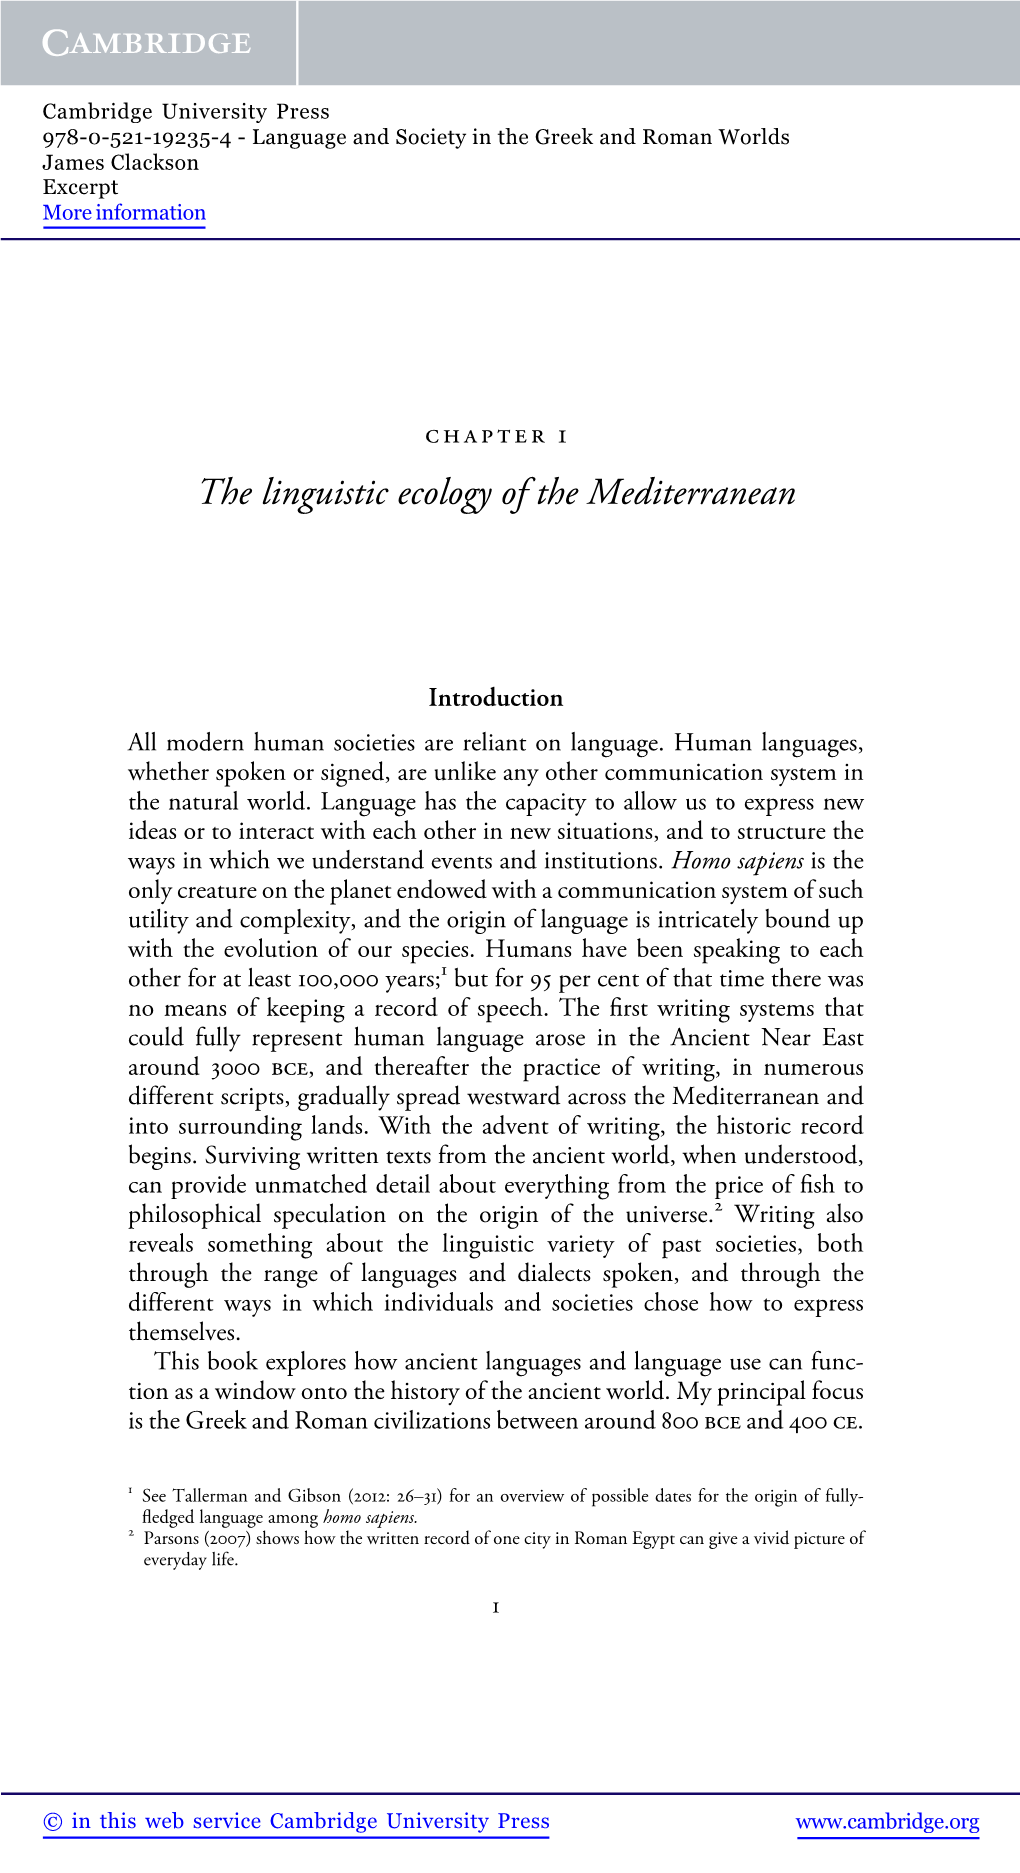 The Linguistic Ecology of the Mediterranean